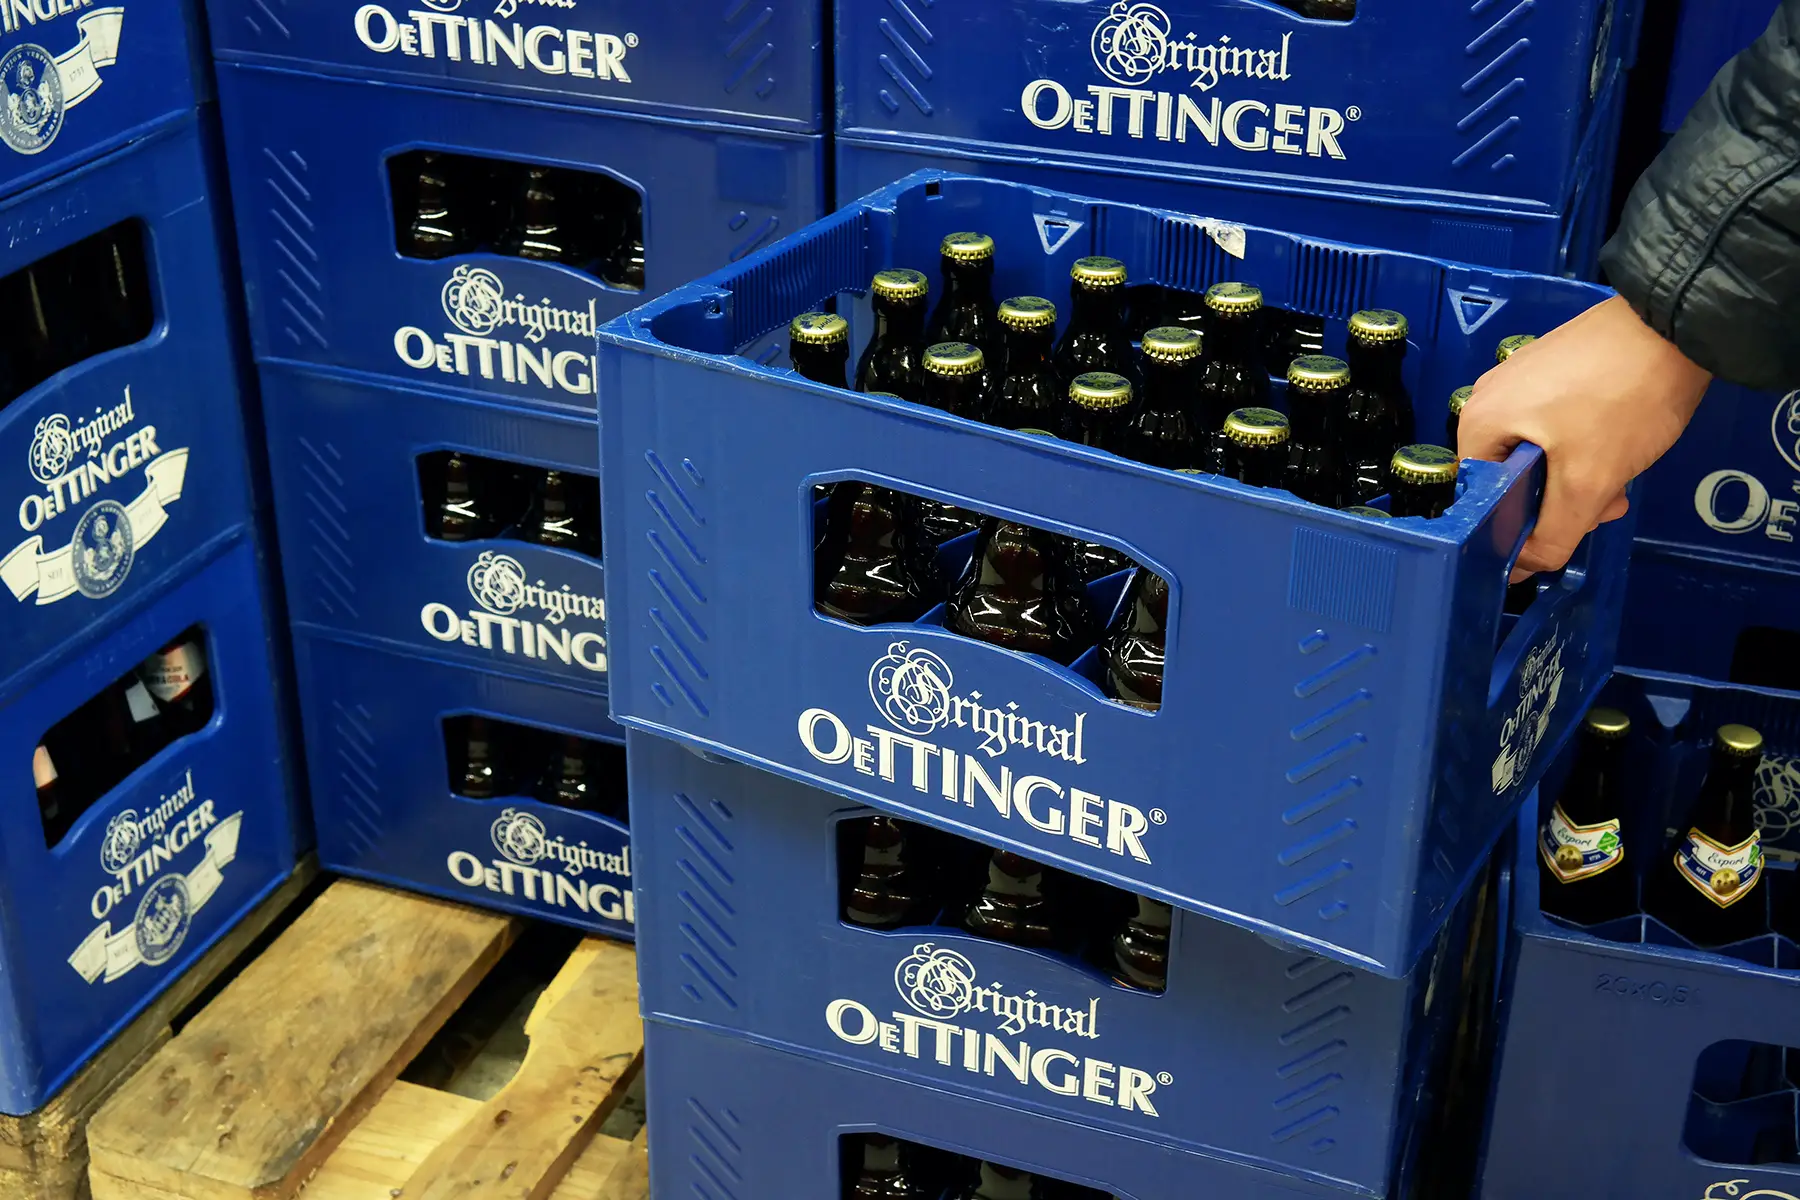 Crates of Oettinger beer